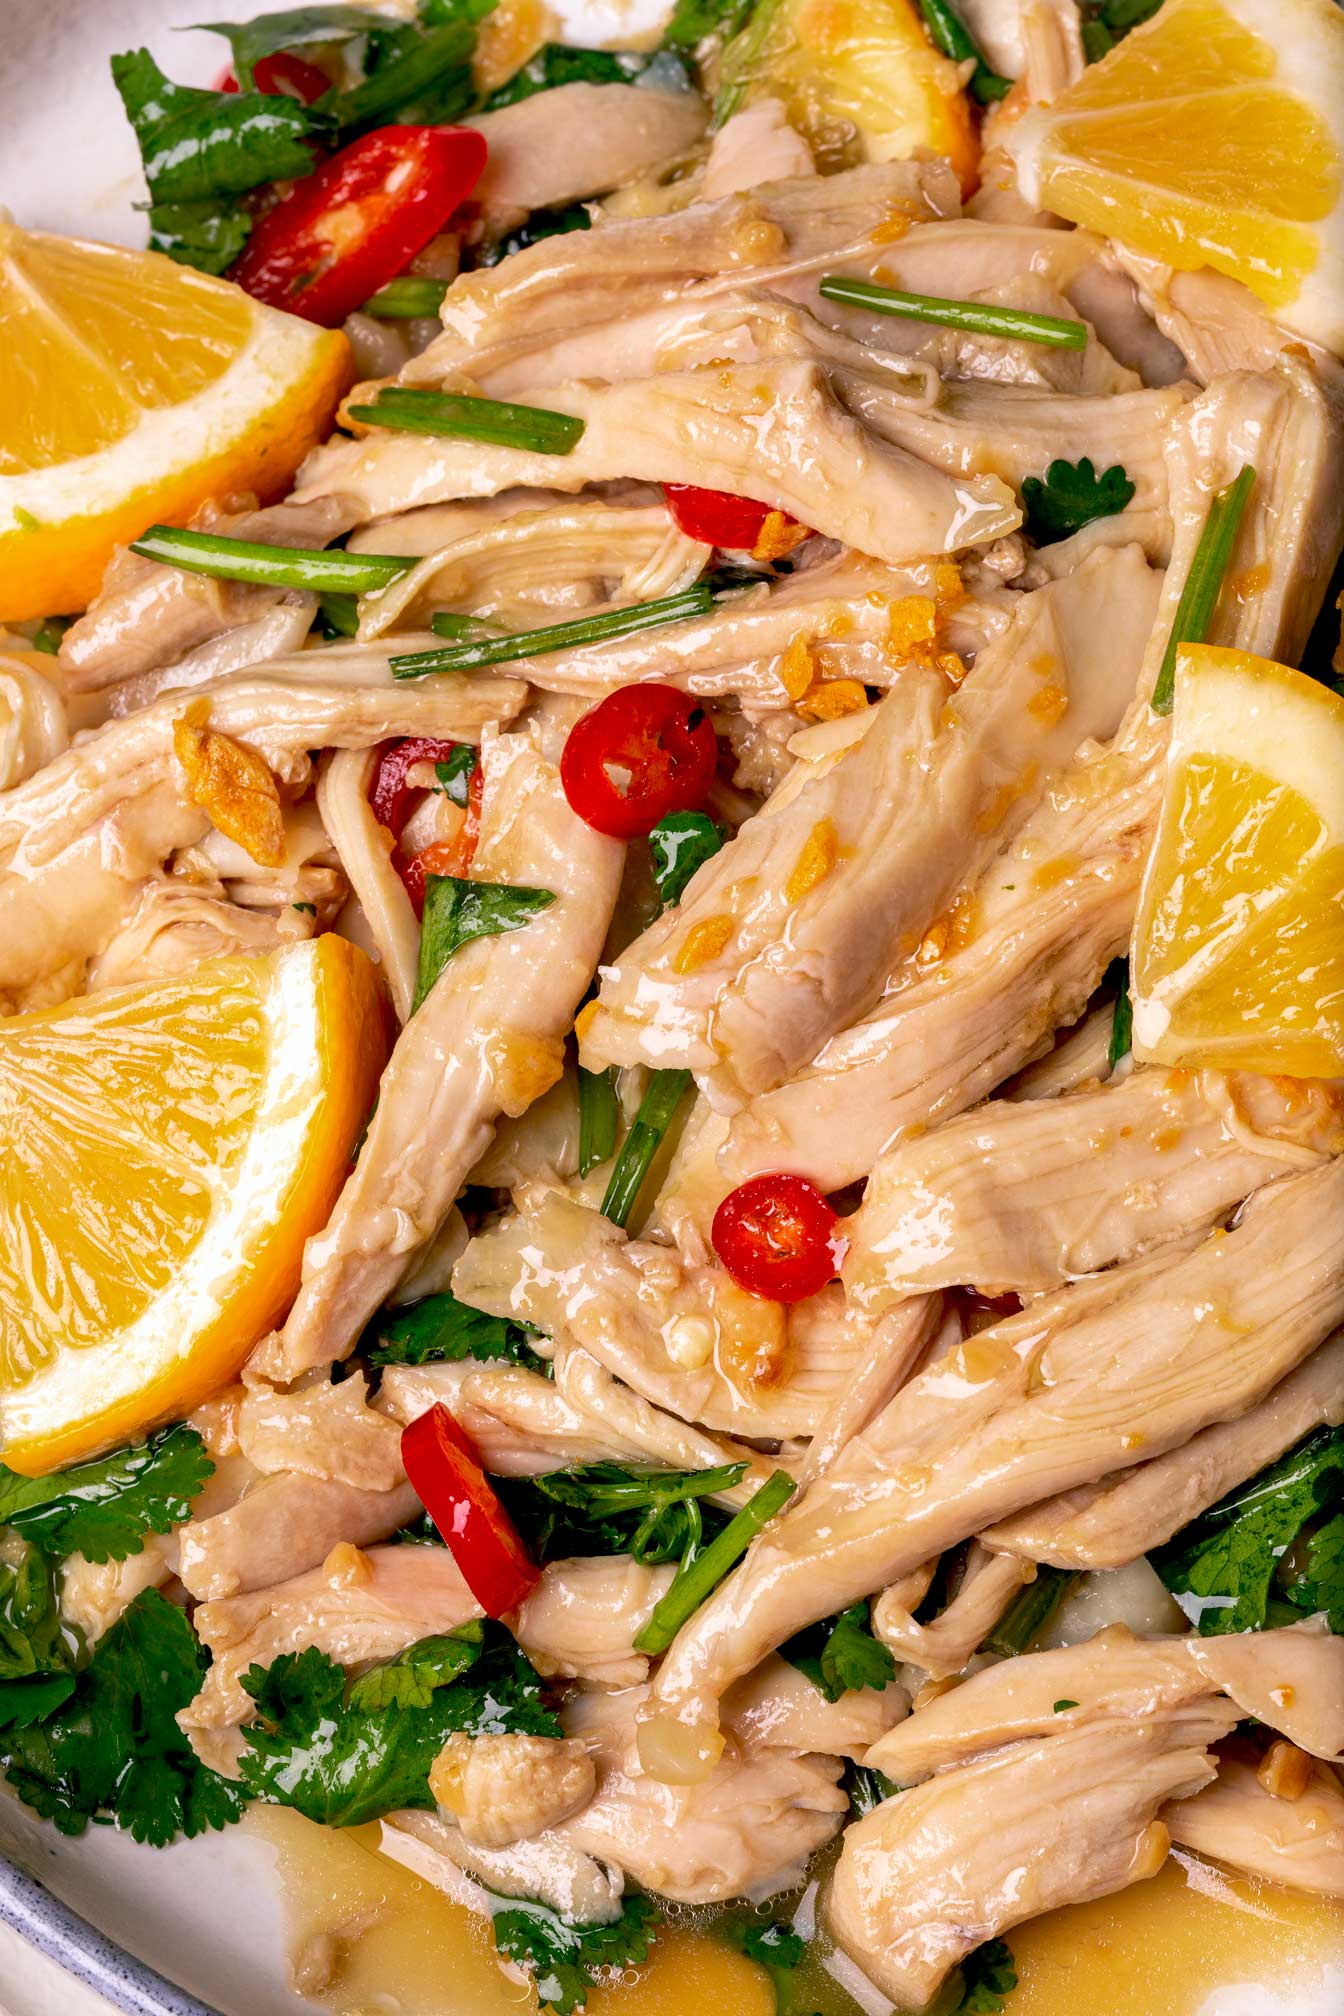 Chinese Lemon Chicken Salad - A vibrant and healthy salad with tender chicken, zesty lemon, and aromatic coriander.